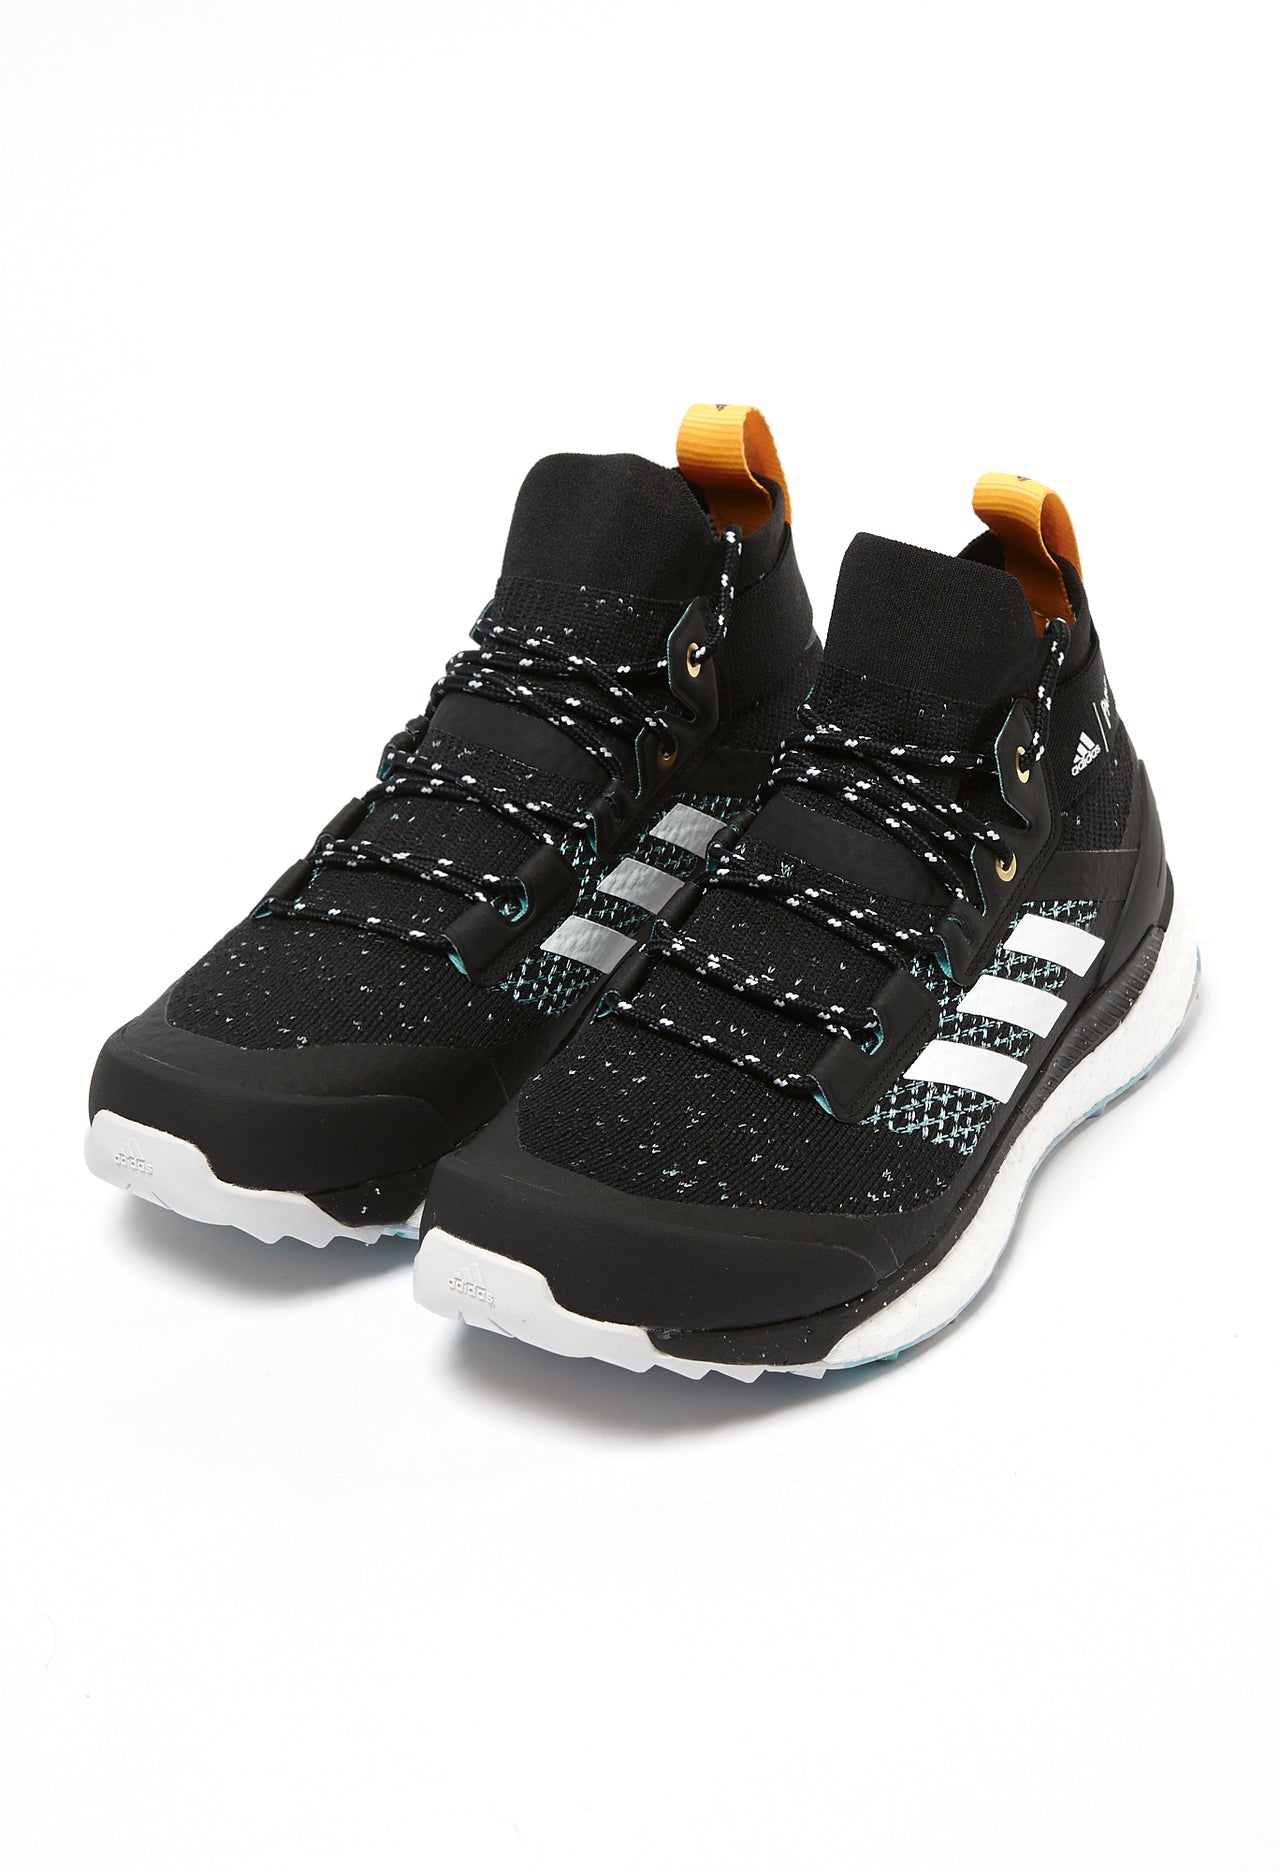 adidas TERREX Free Hiker Parley Women's Boots - Core Black/Ftwr White/Real Gold